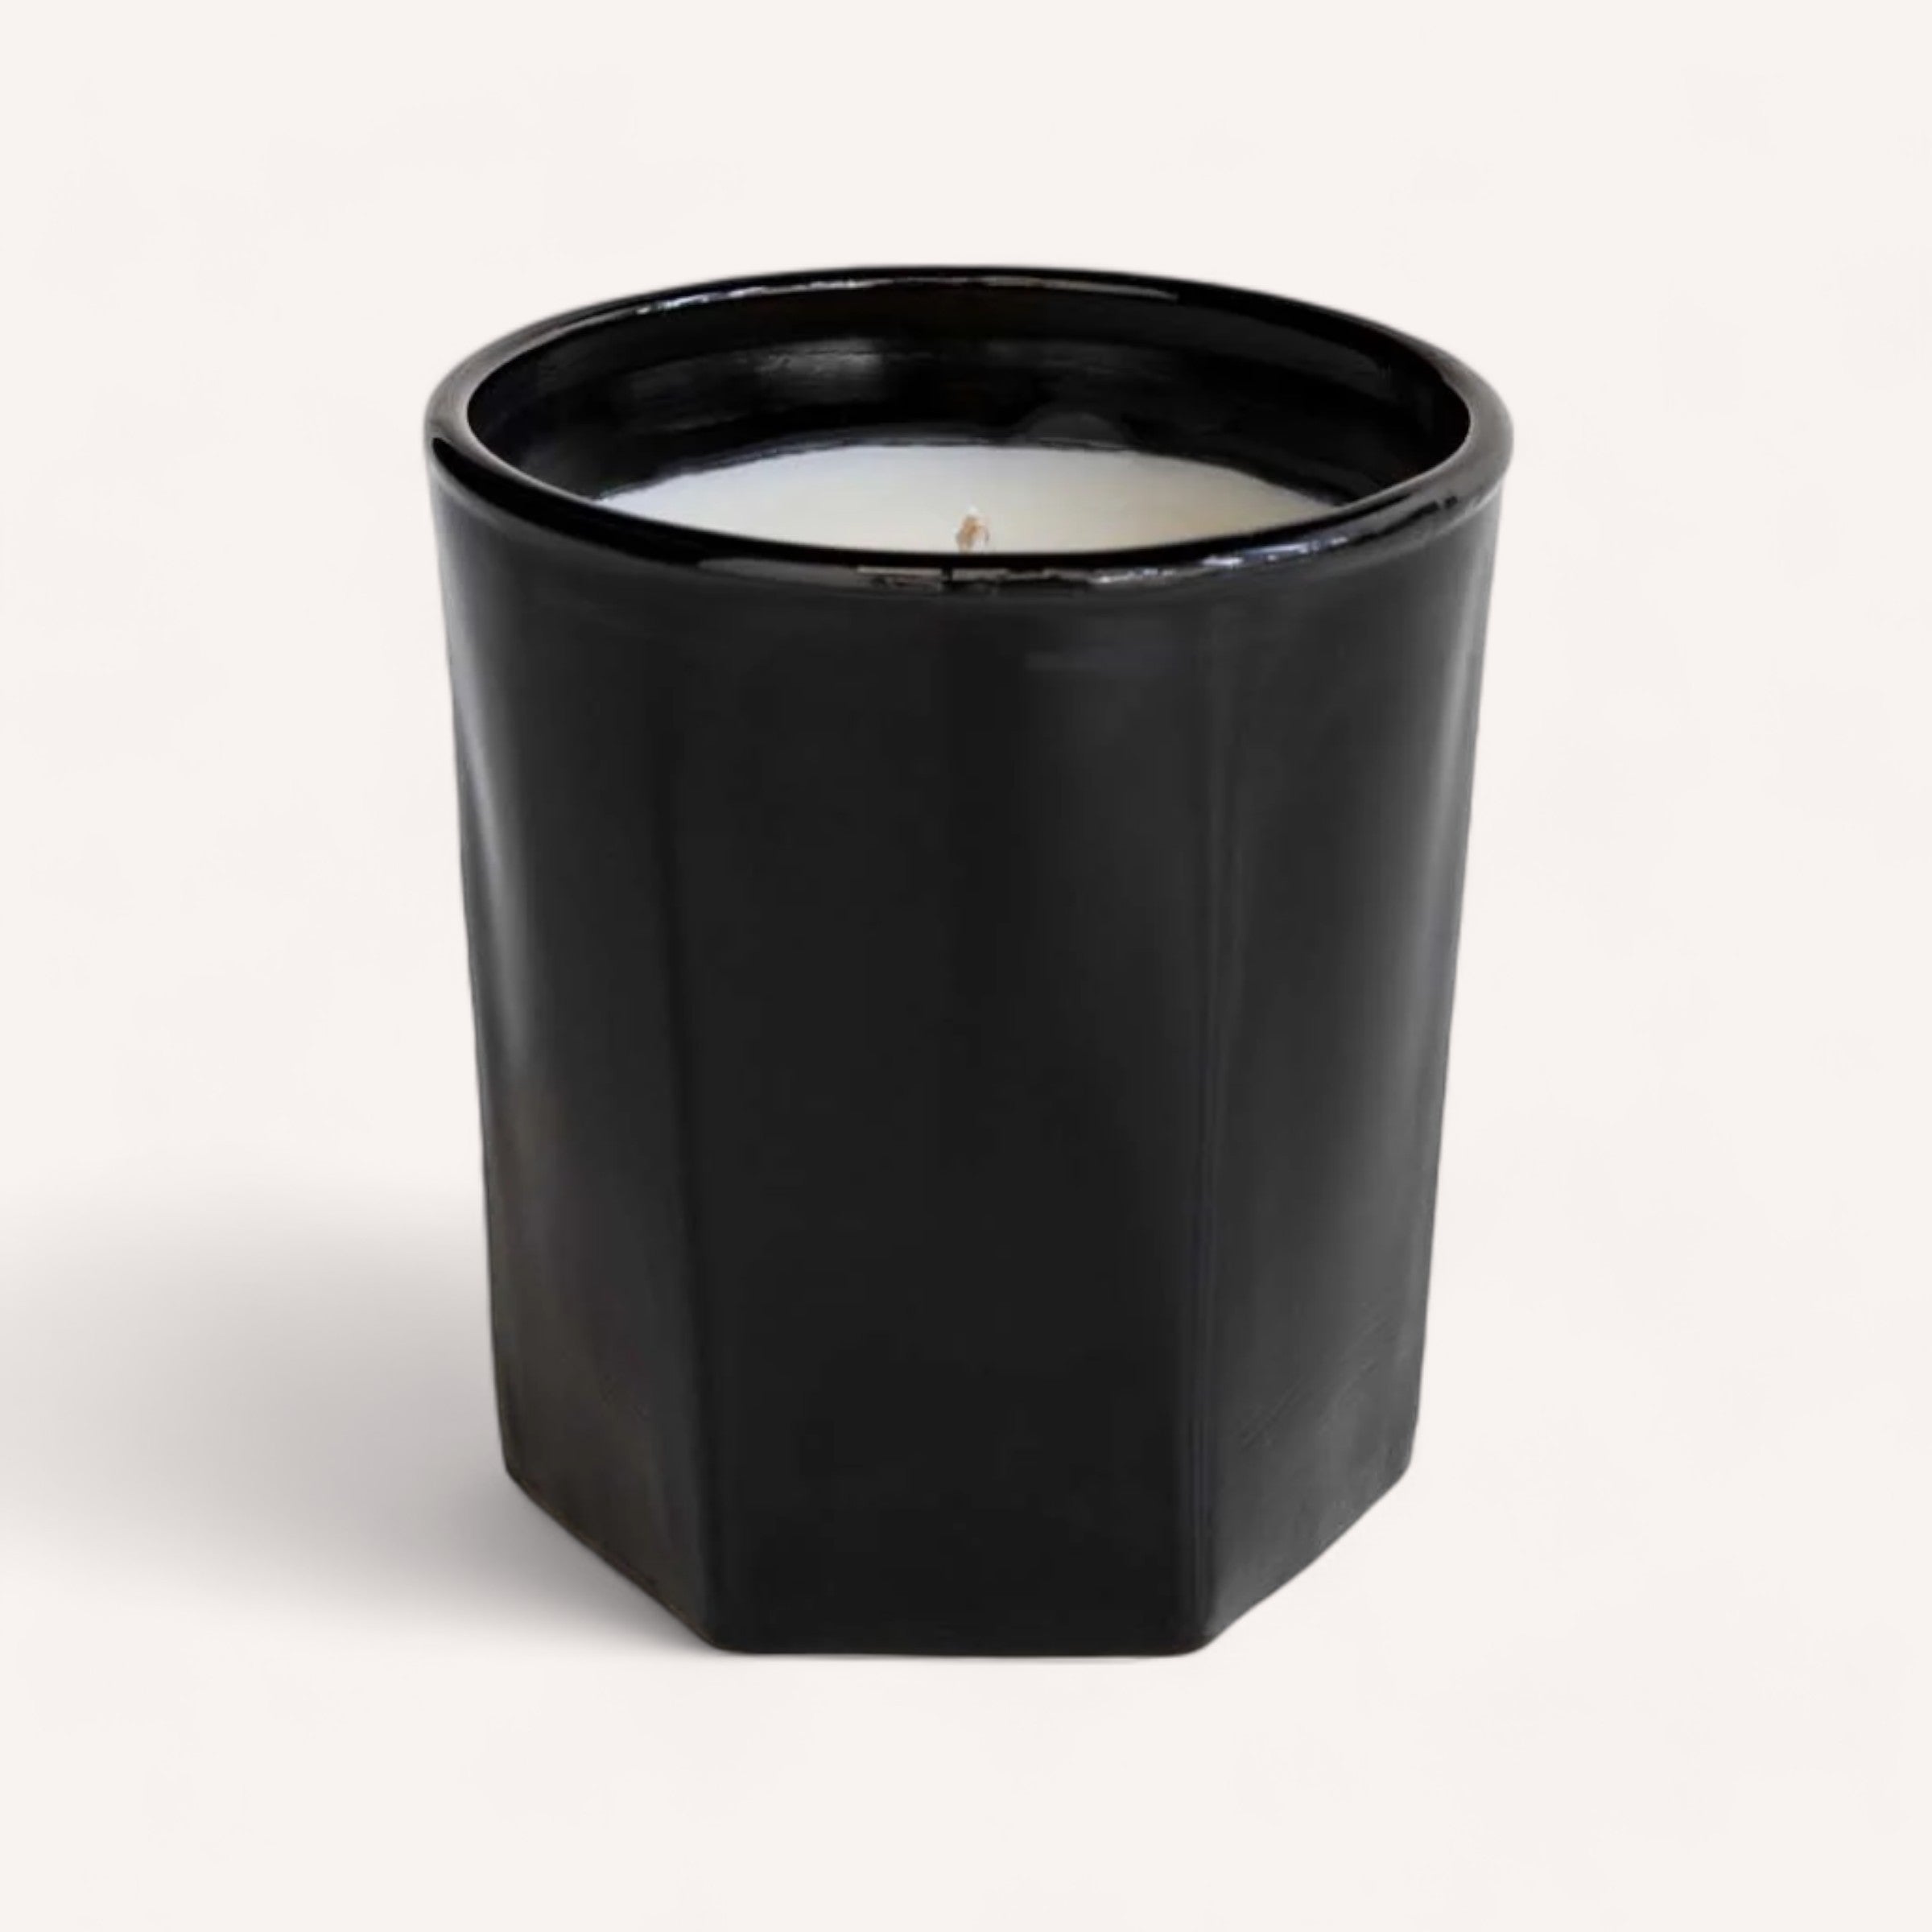 A single-wick, handcrafted Remana & Orange Blossom candle by Real World within a sleek black cylindrical container against a clean white background.